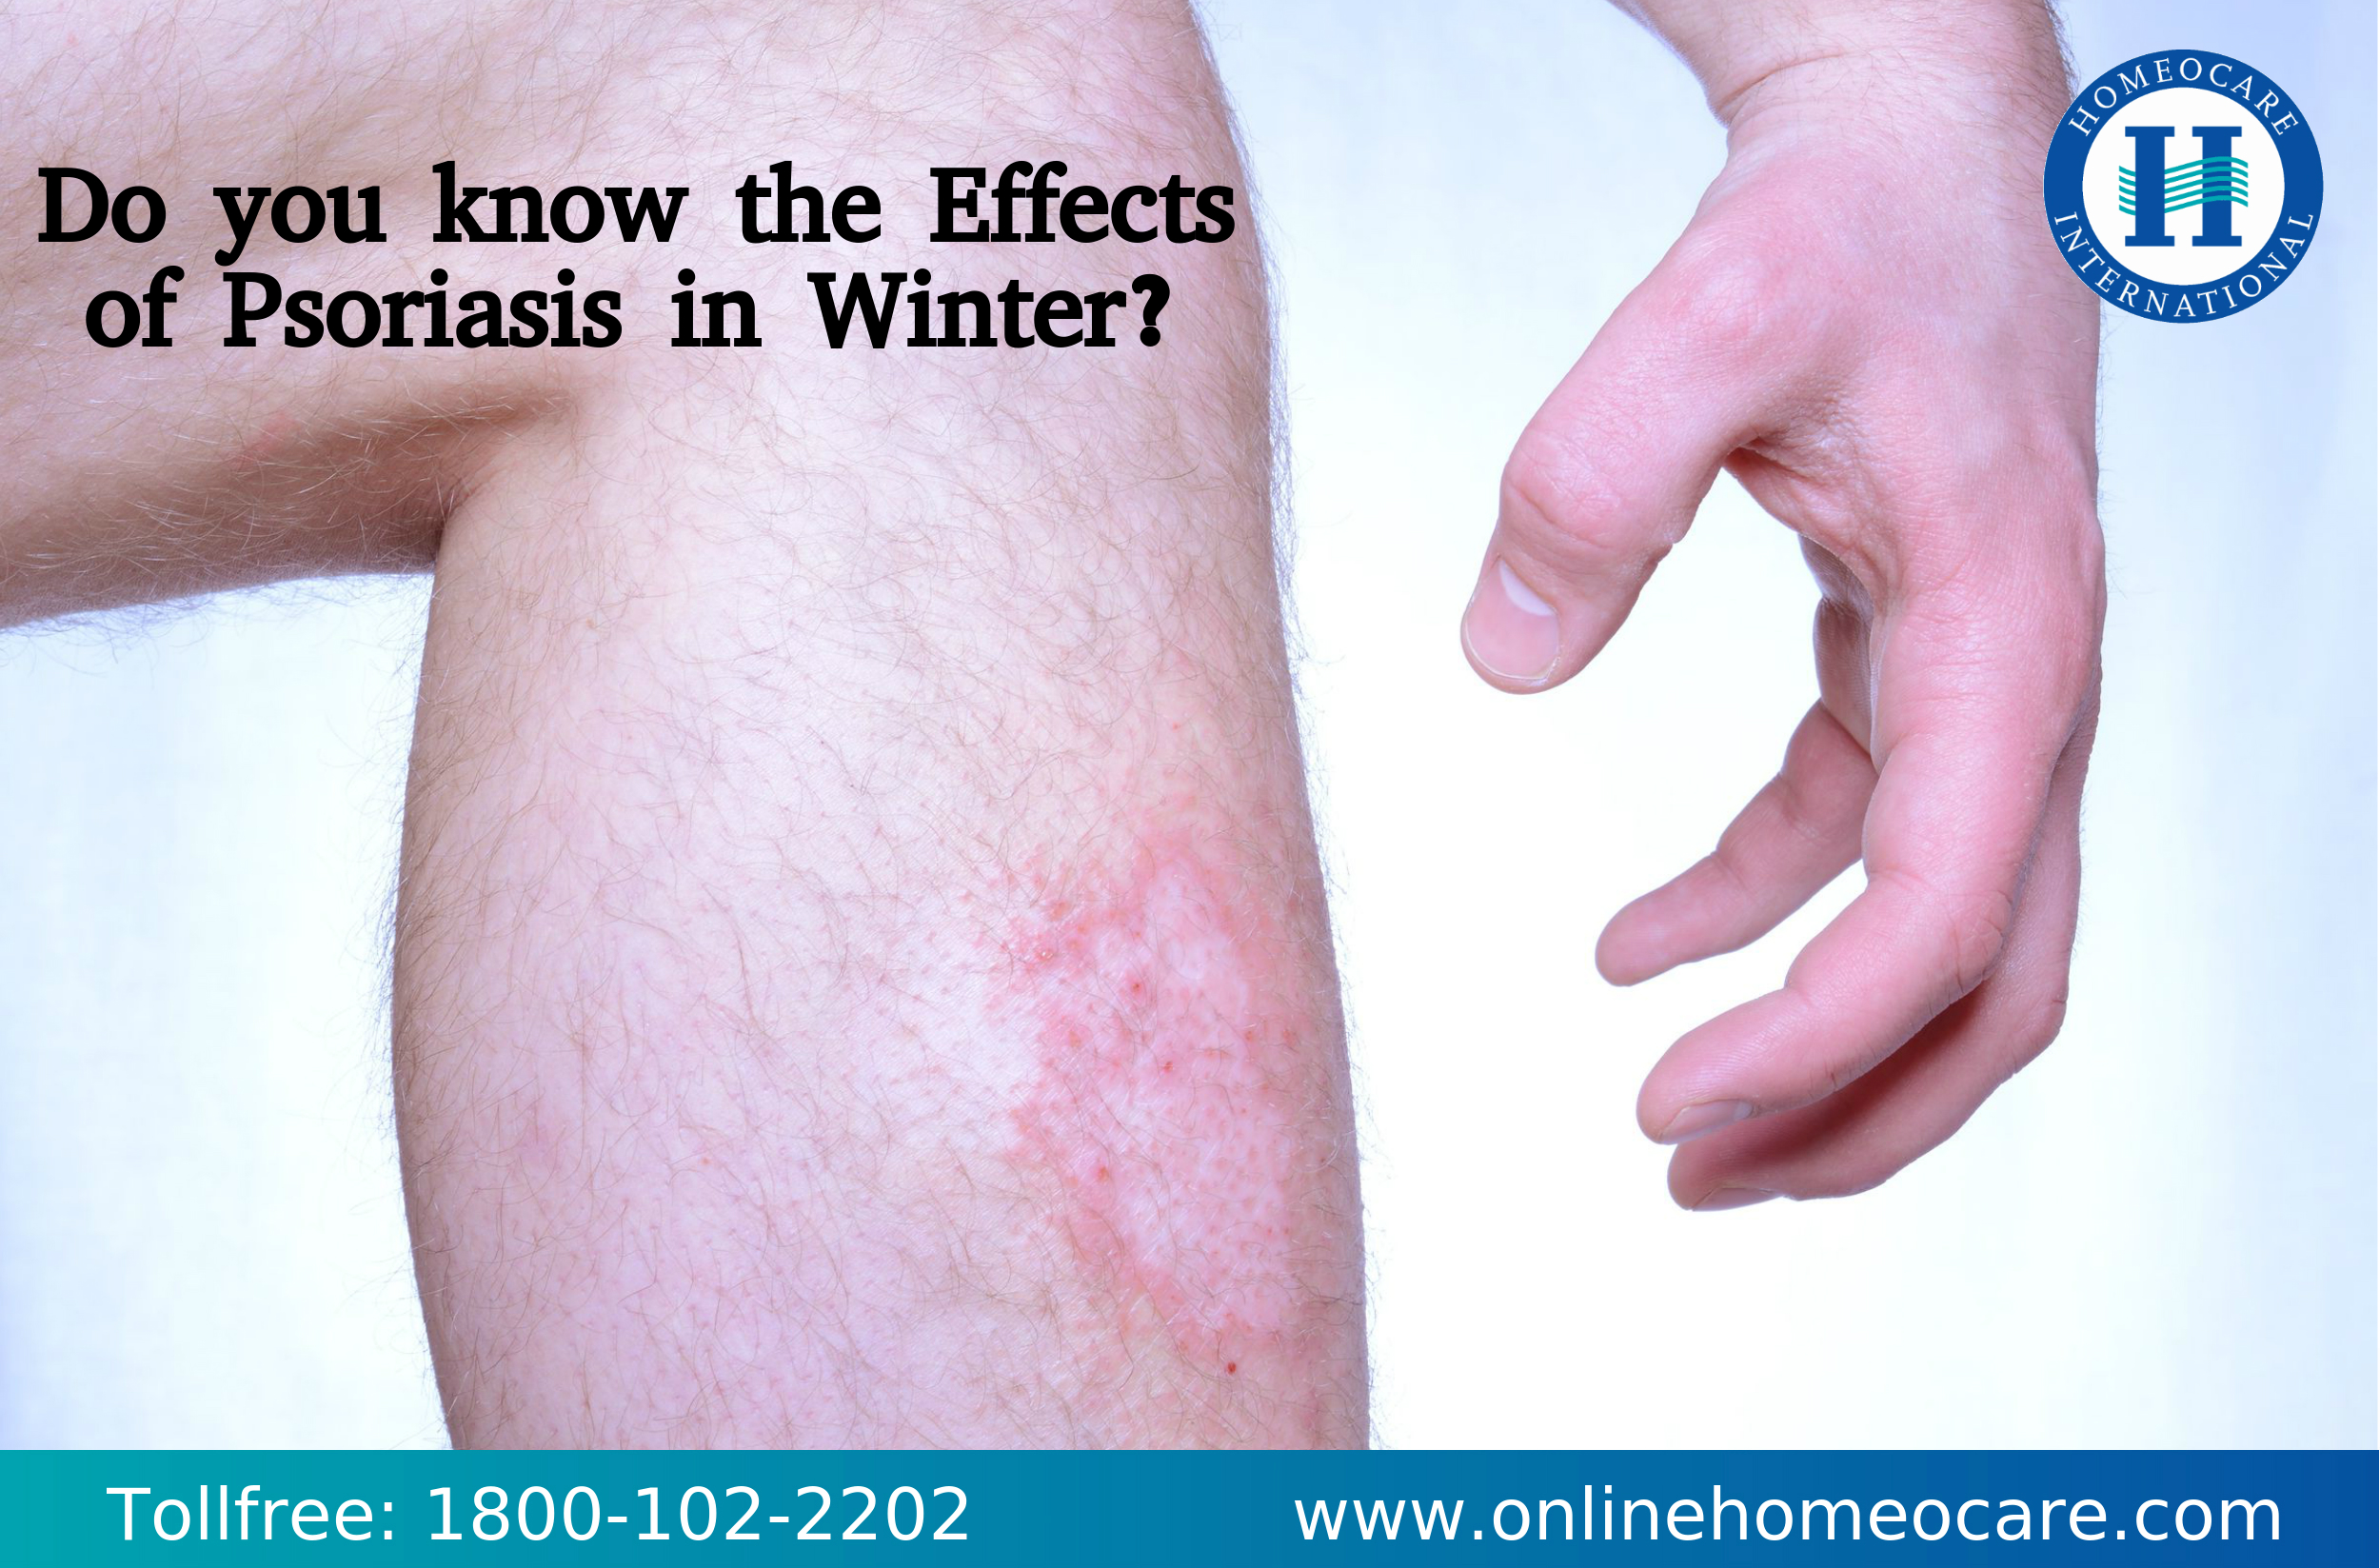 Psoriasis effects in winter